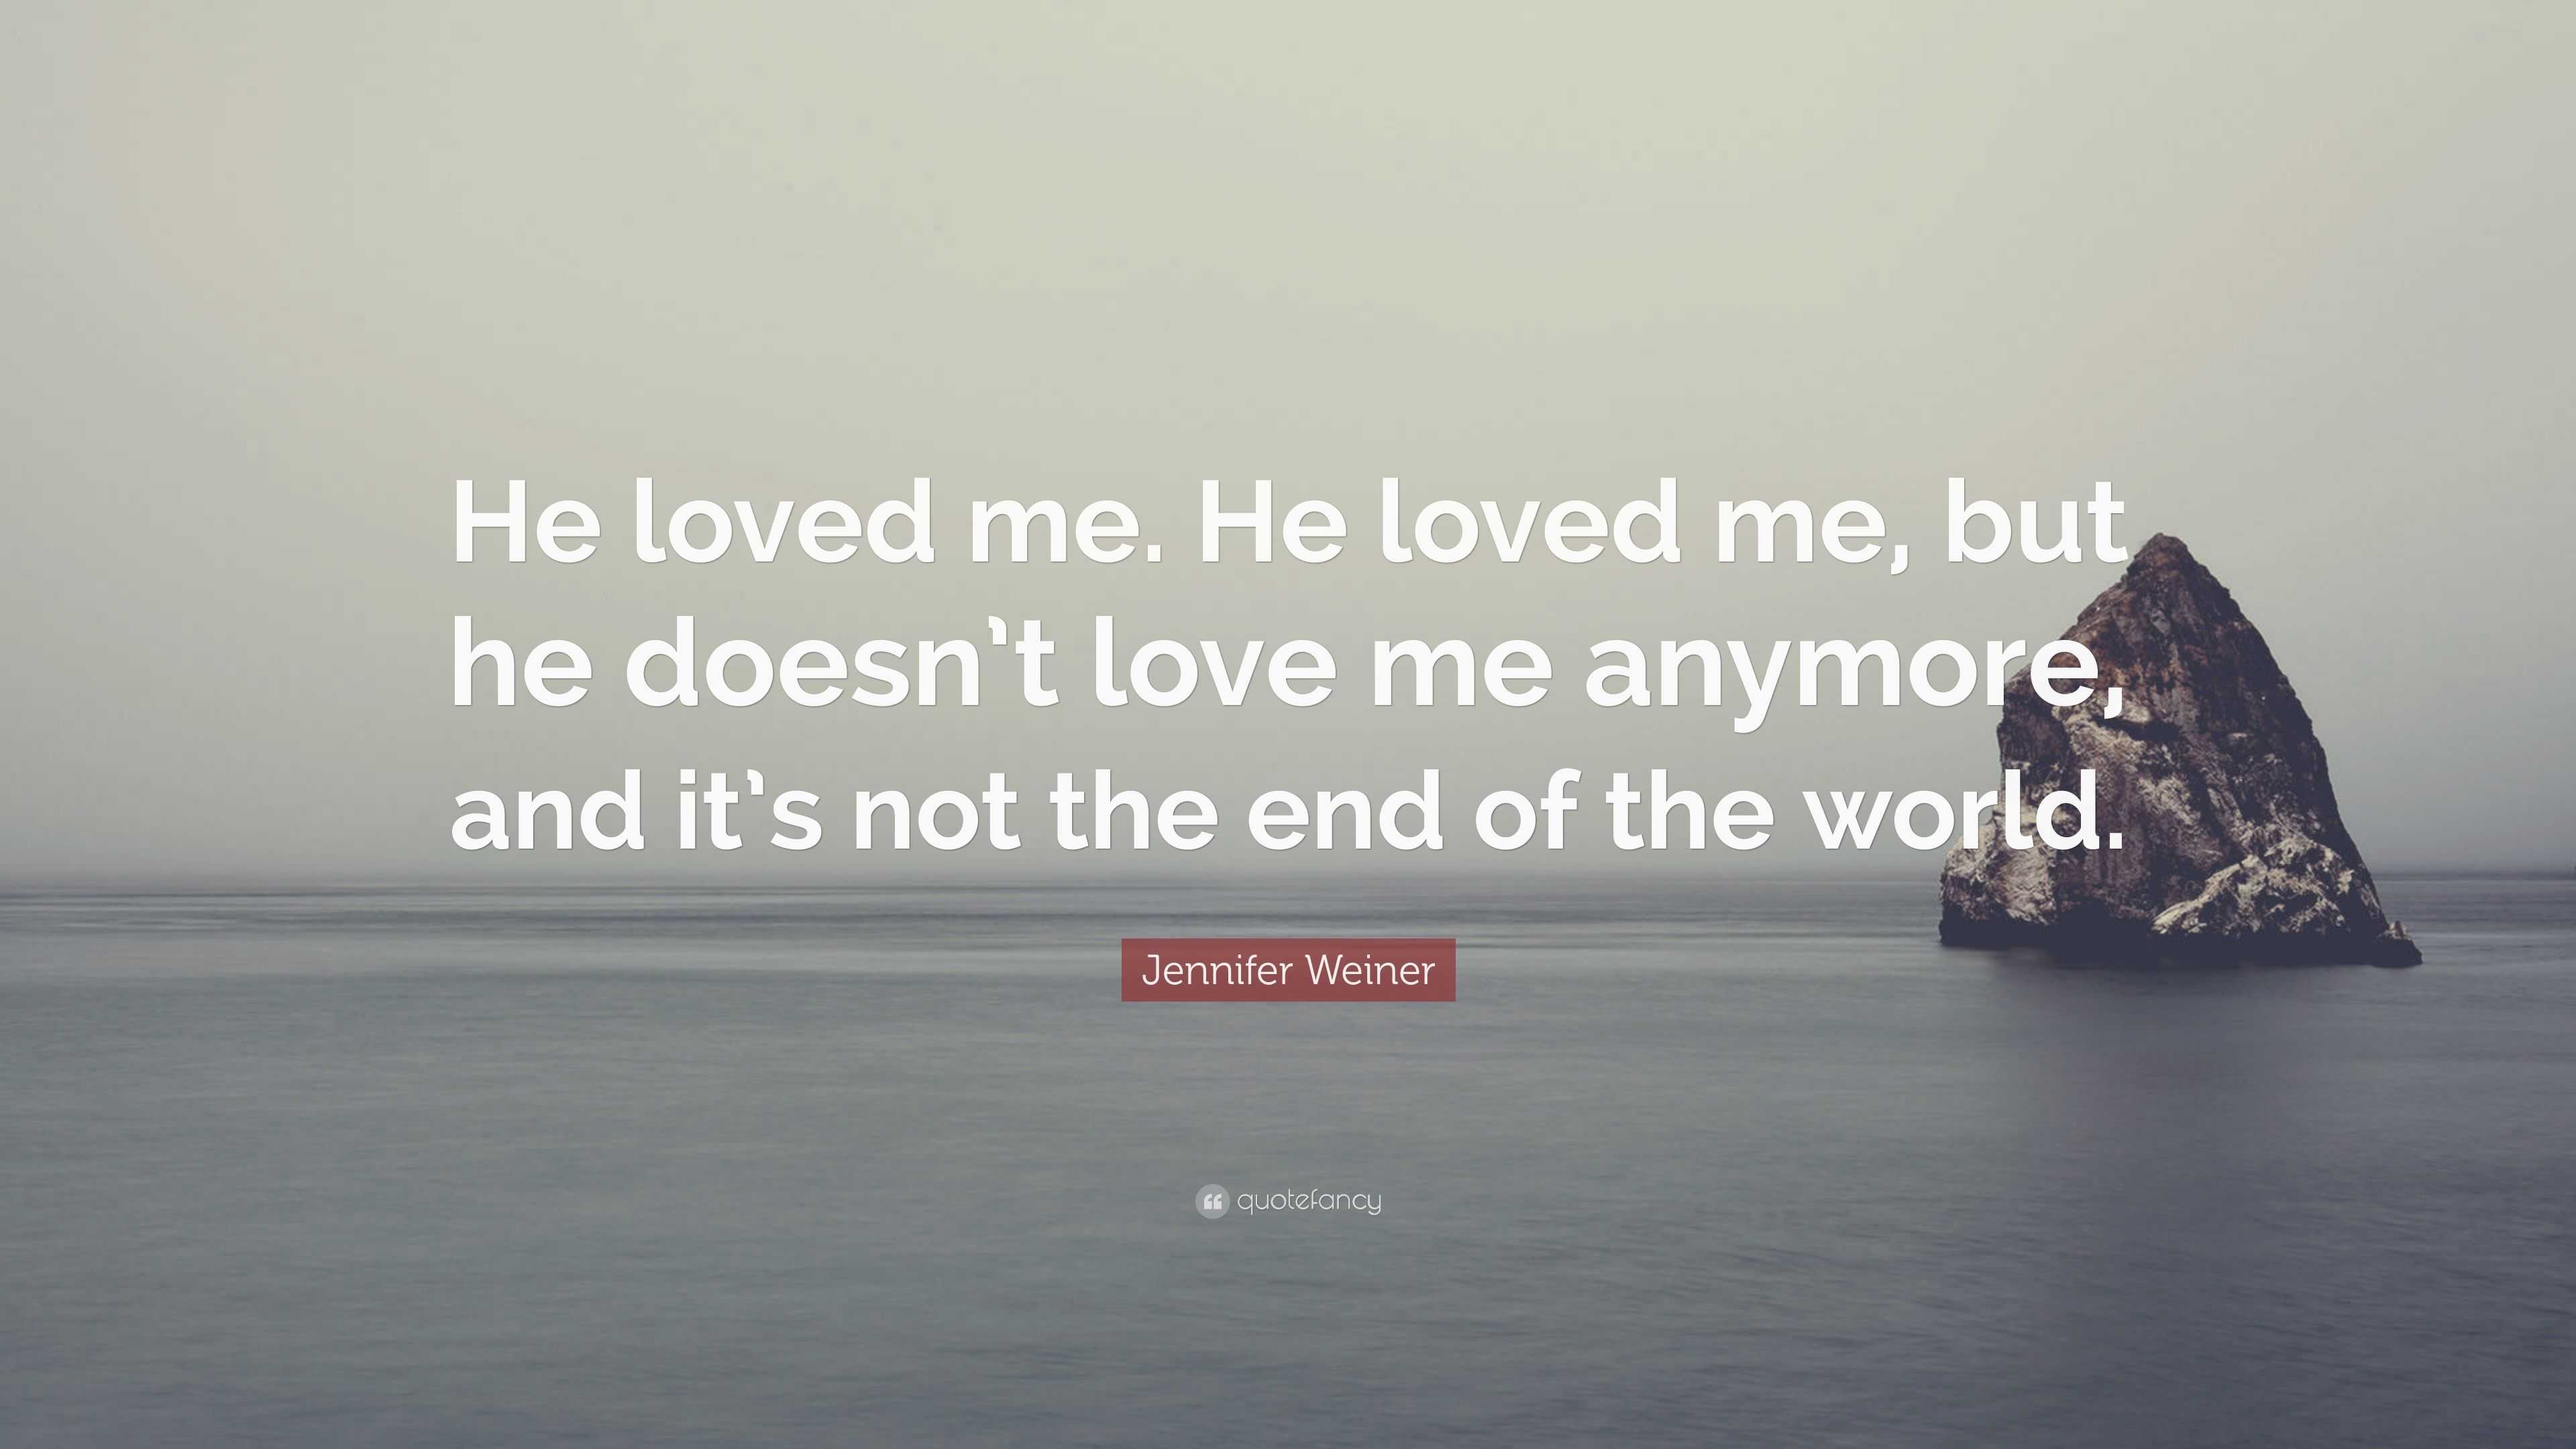 Jennifer Weiner Quote “He loved me He loved me but he doesn